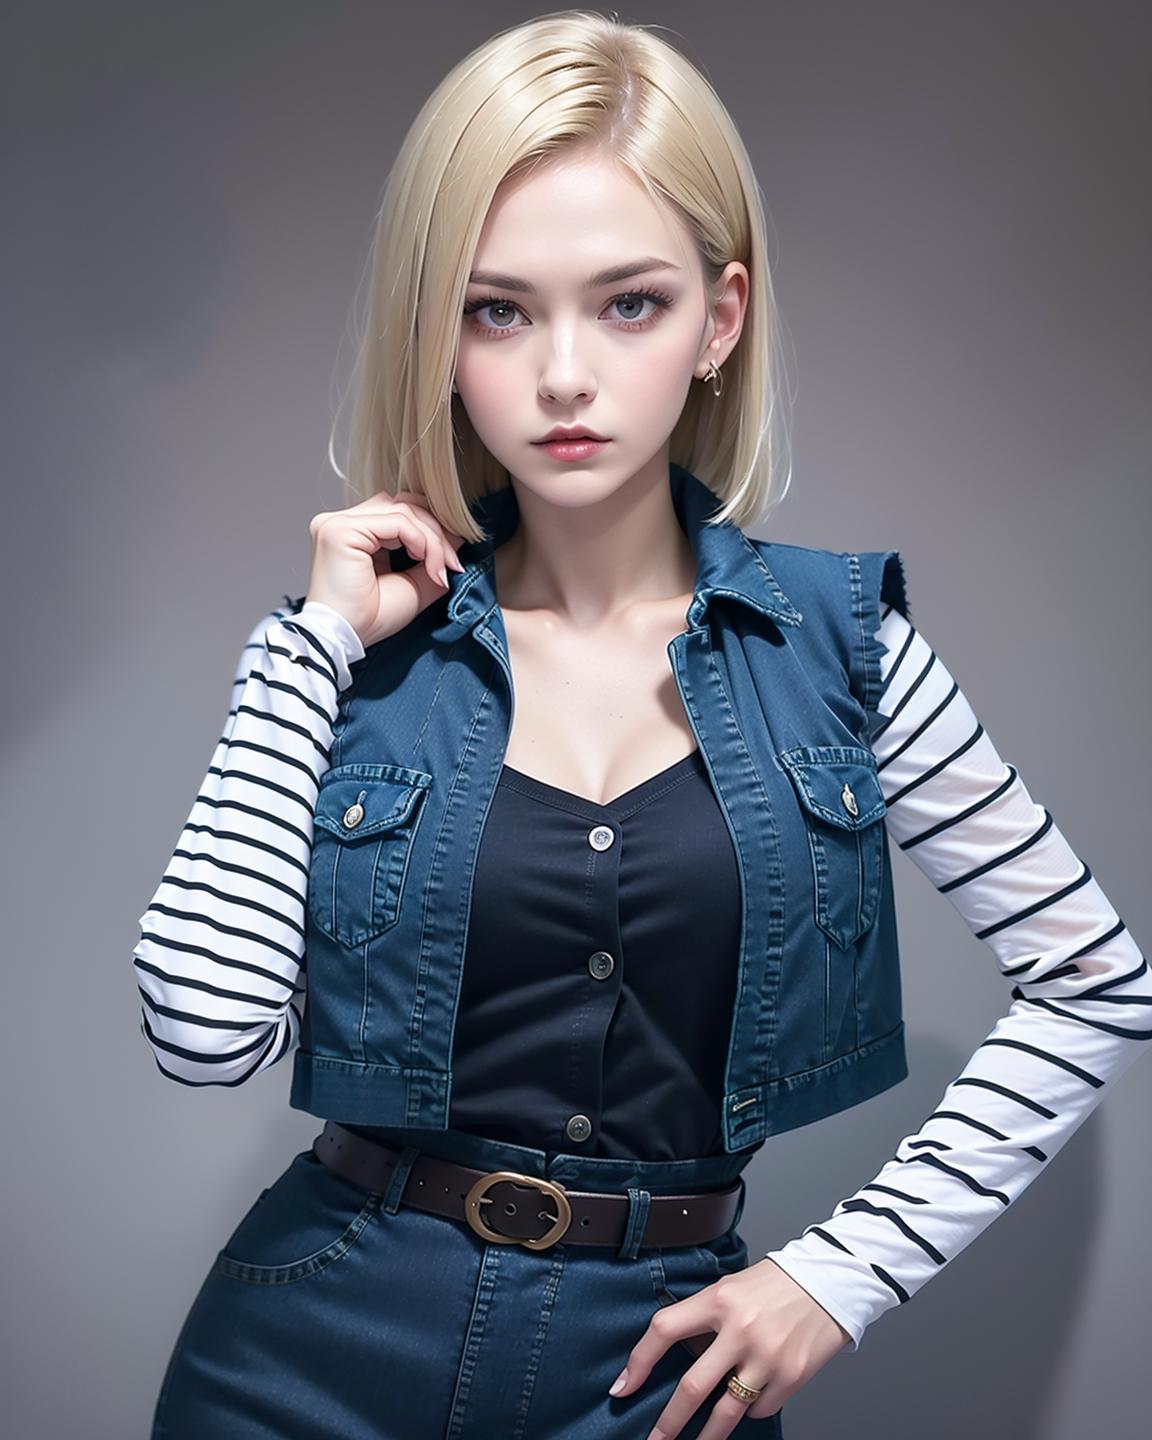 A young woman wearing a blue denim vest and black shirt poses for a photo.